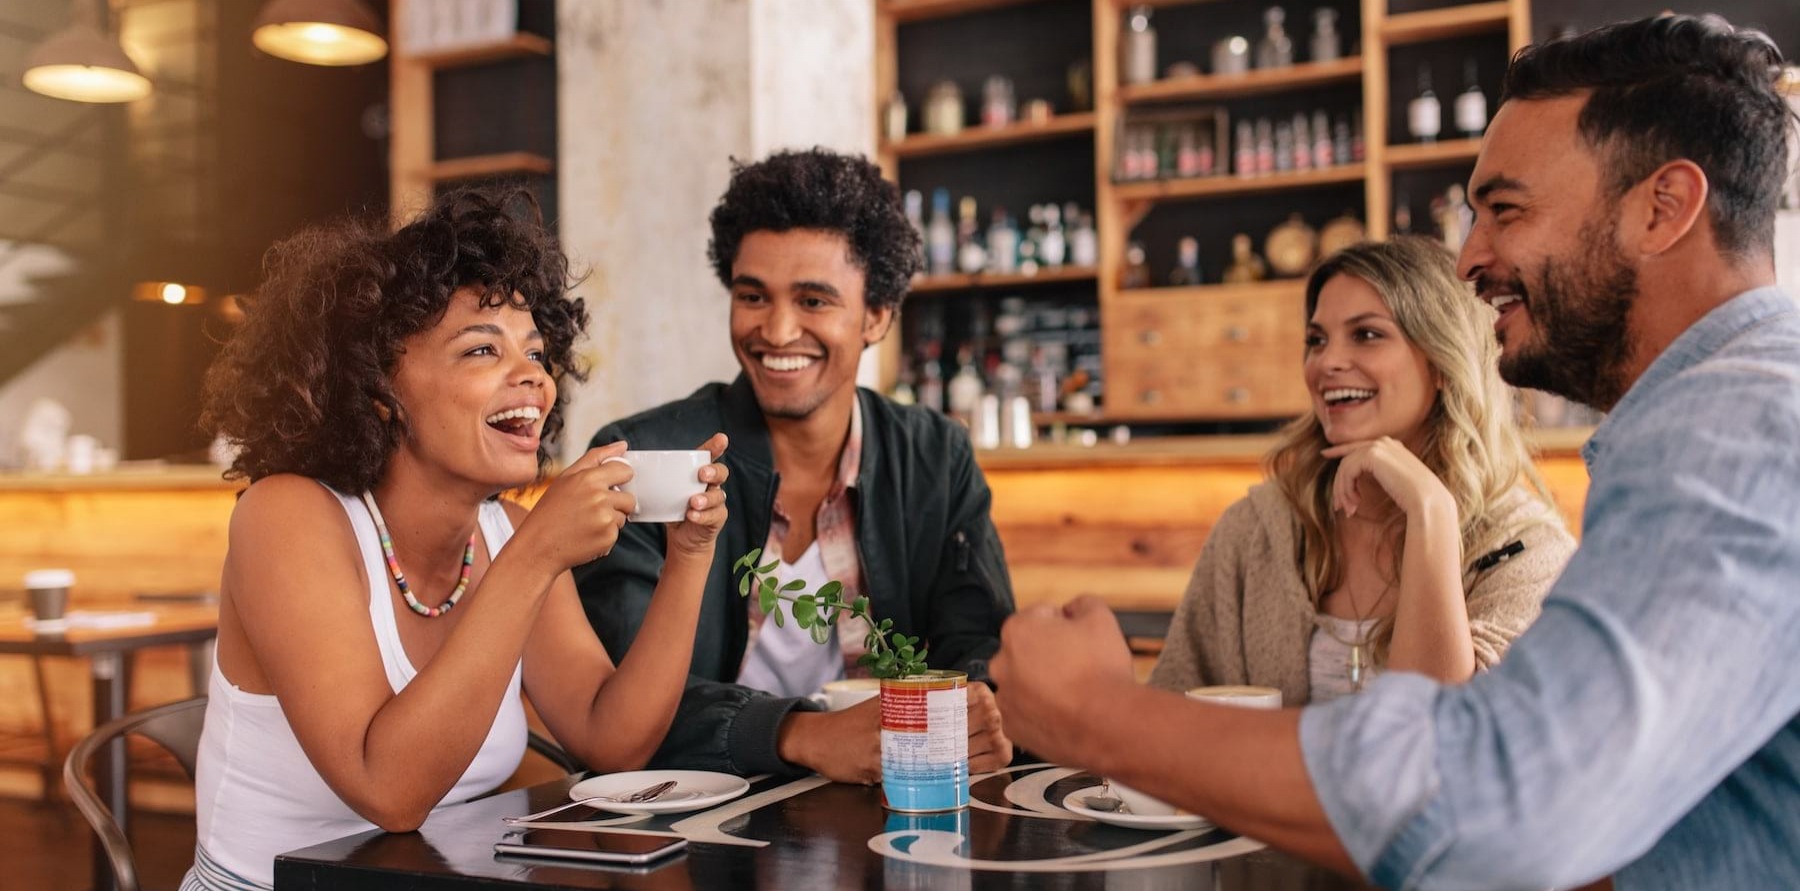 lifestyle image of a group of people laughing over a meal